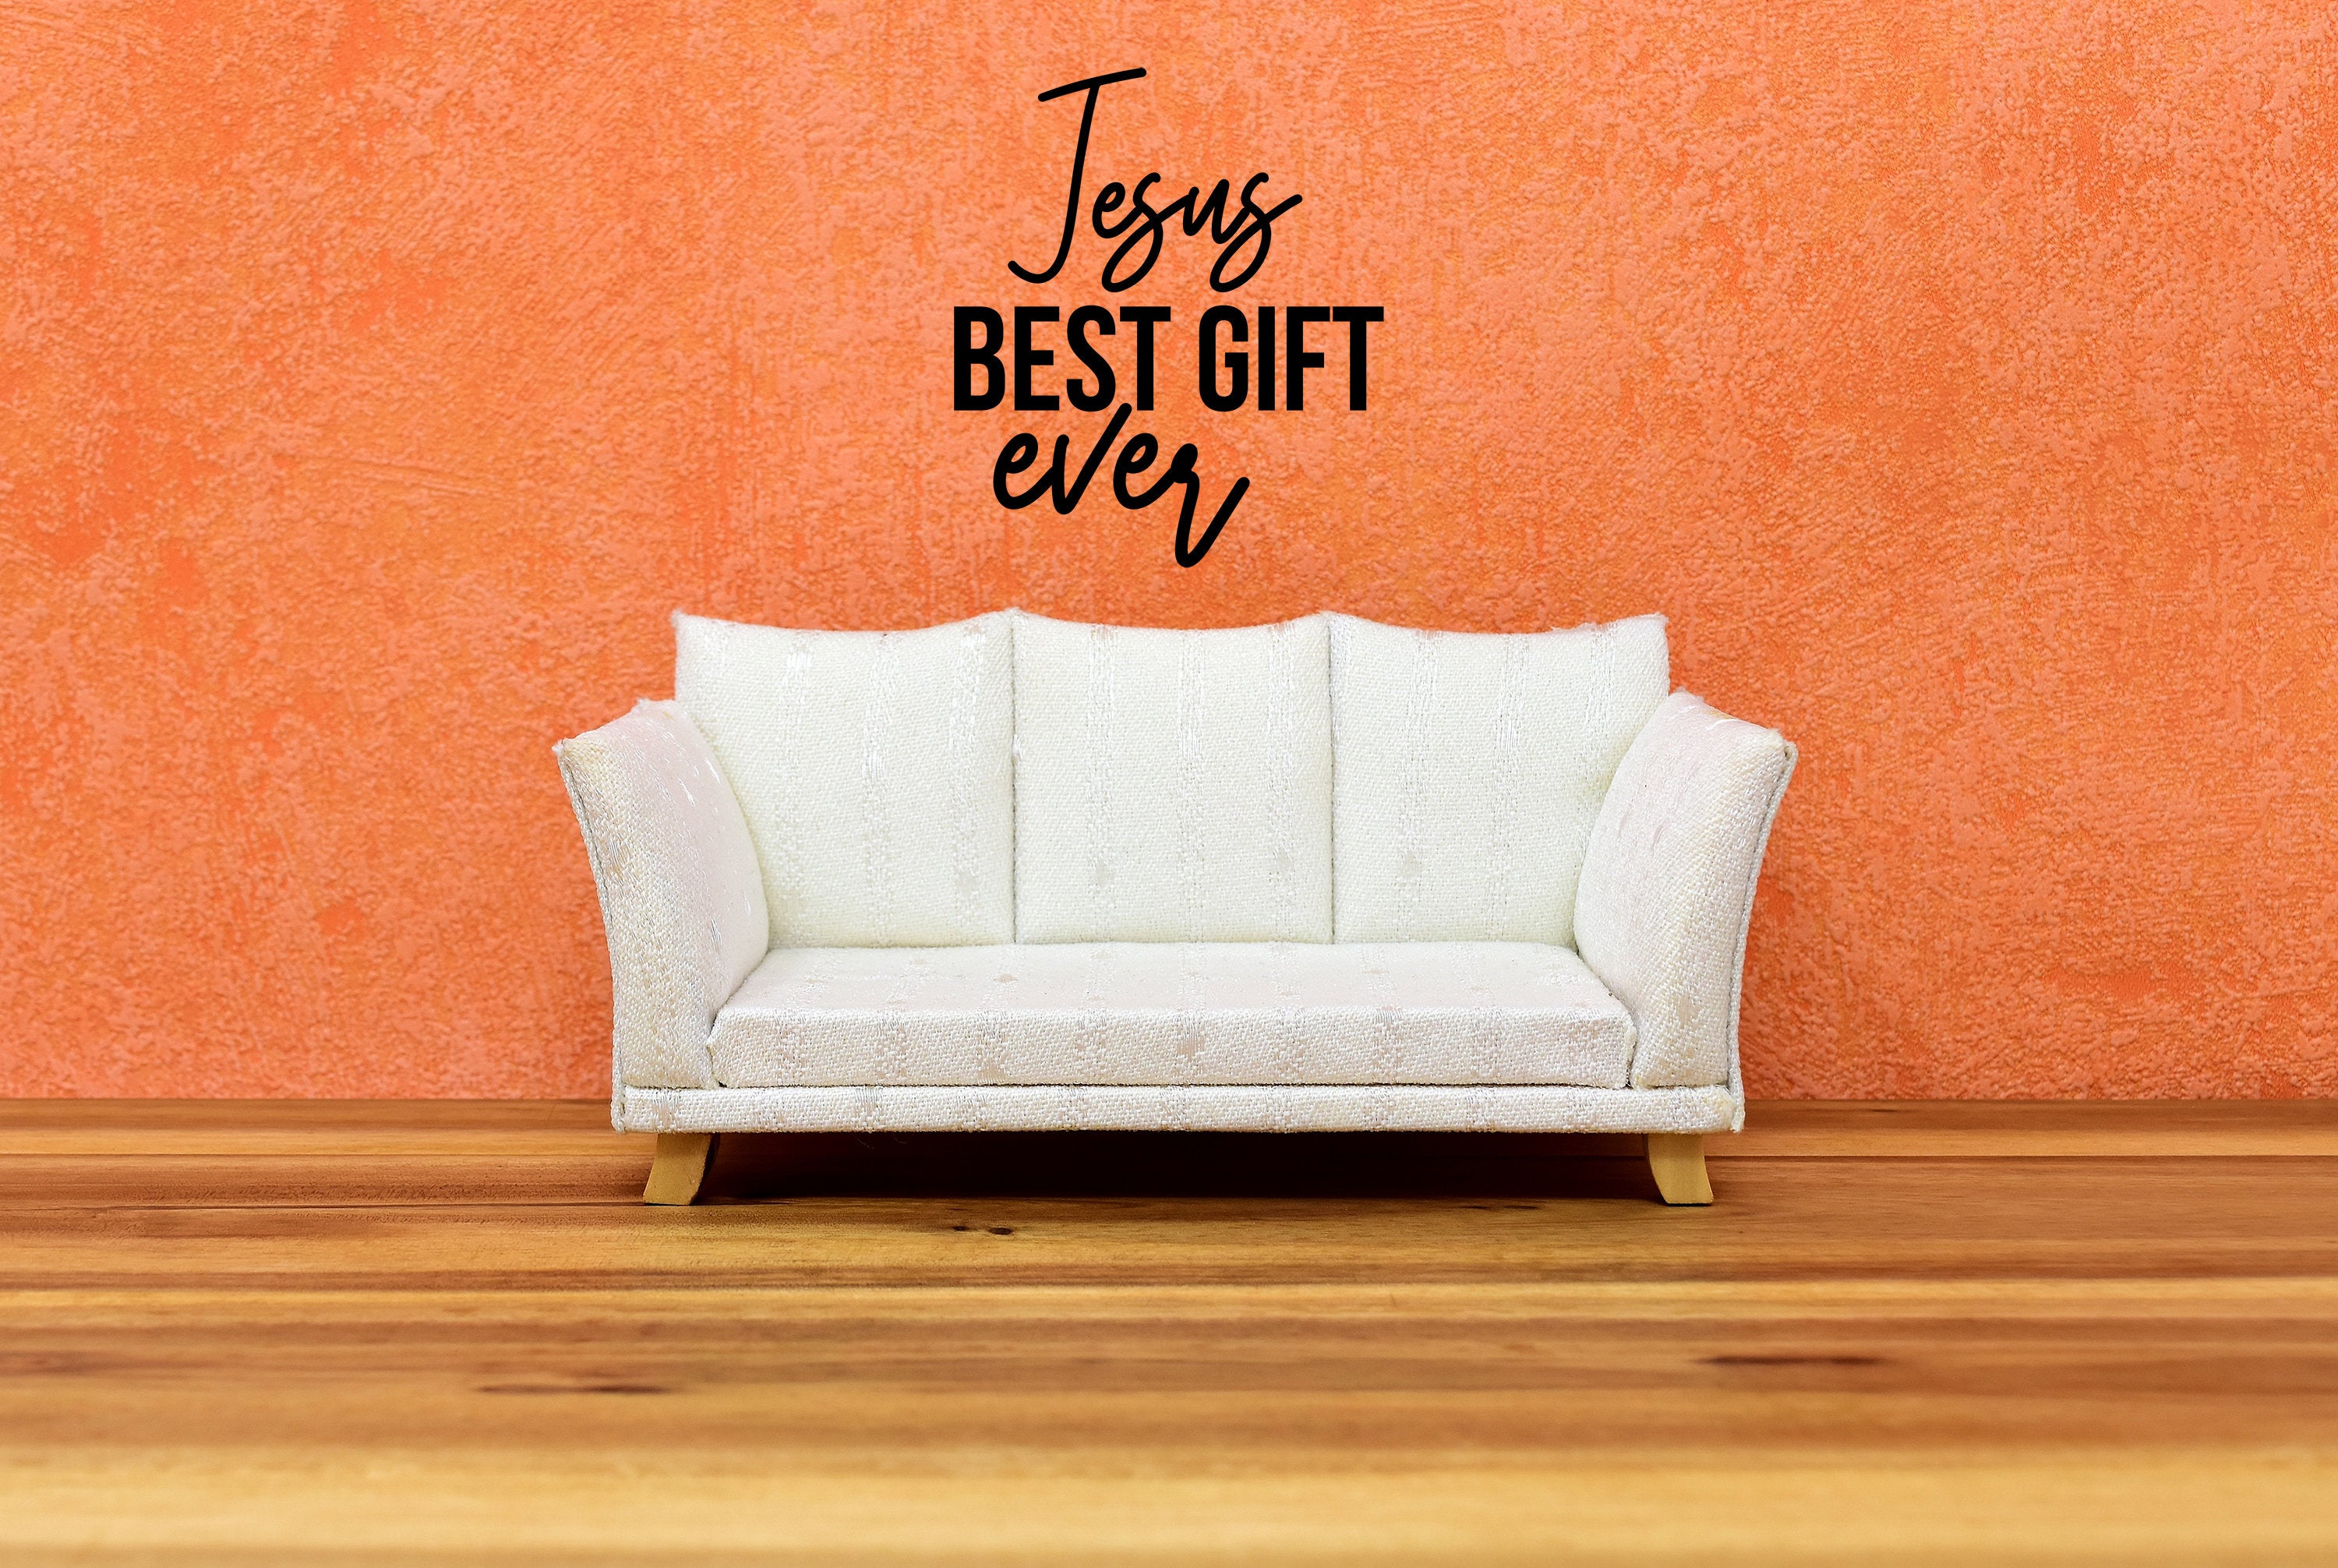 Jesus Best Gift Ever Vinyl Wall Decal - Religious, Christian Home Decor for Doors, Housewarming Gift, Present,